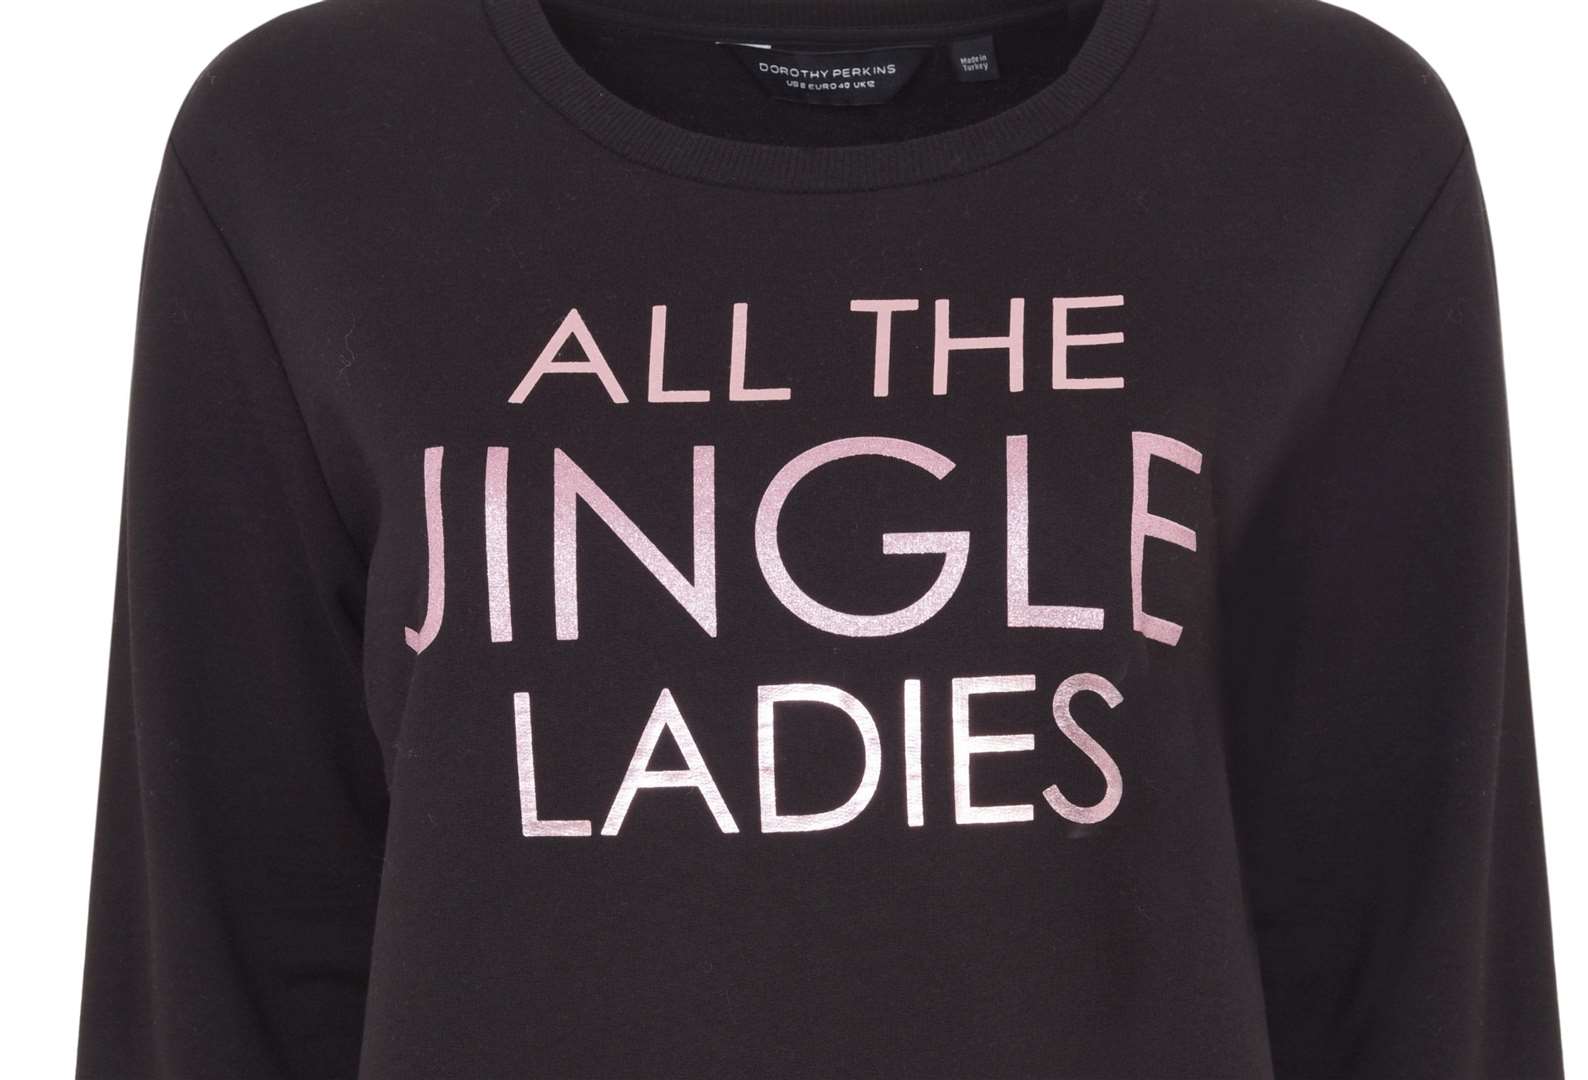 This Beyonce inspired jumper is £22 from Dorothy Perkins